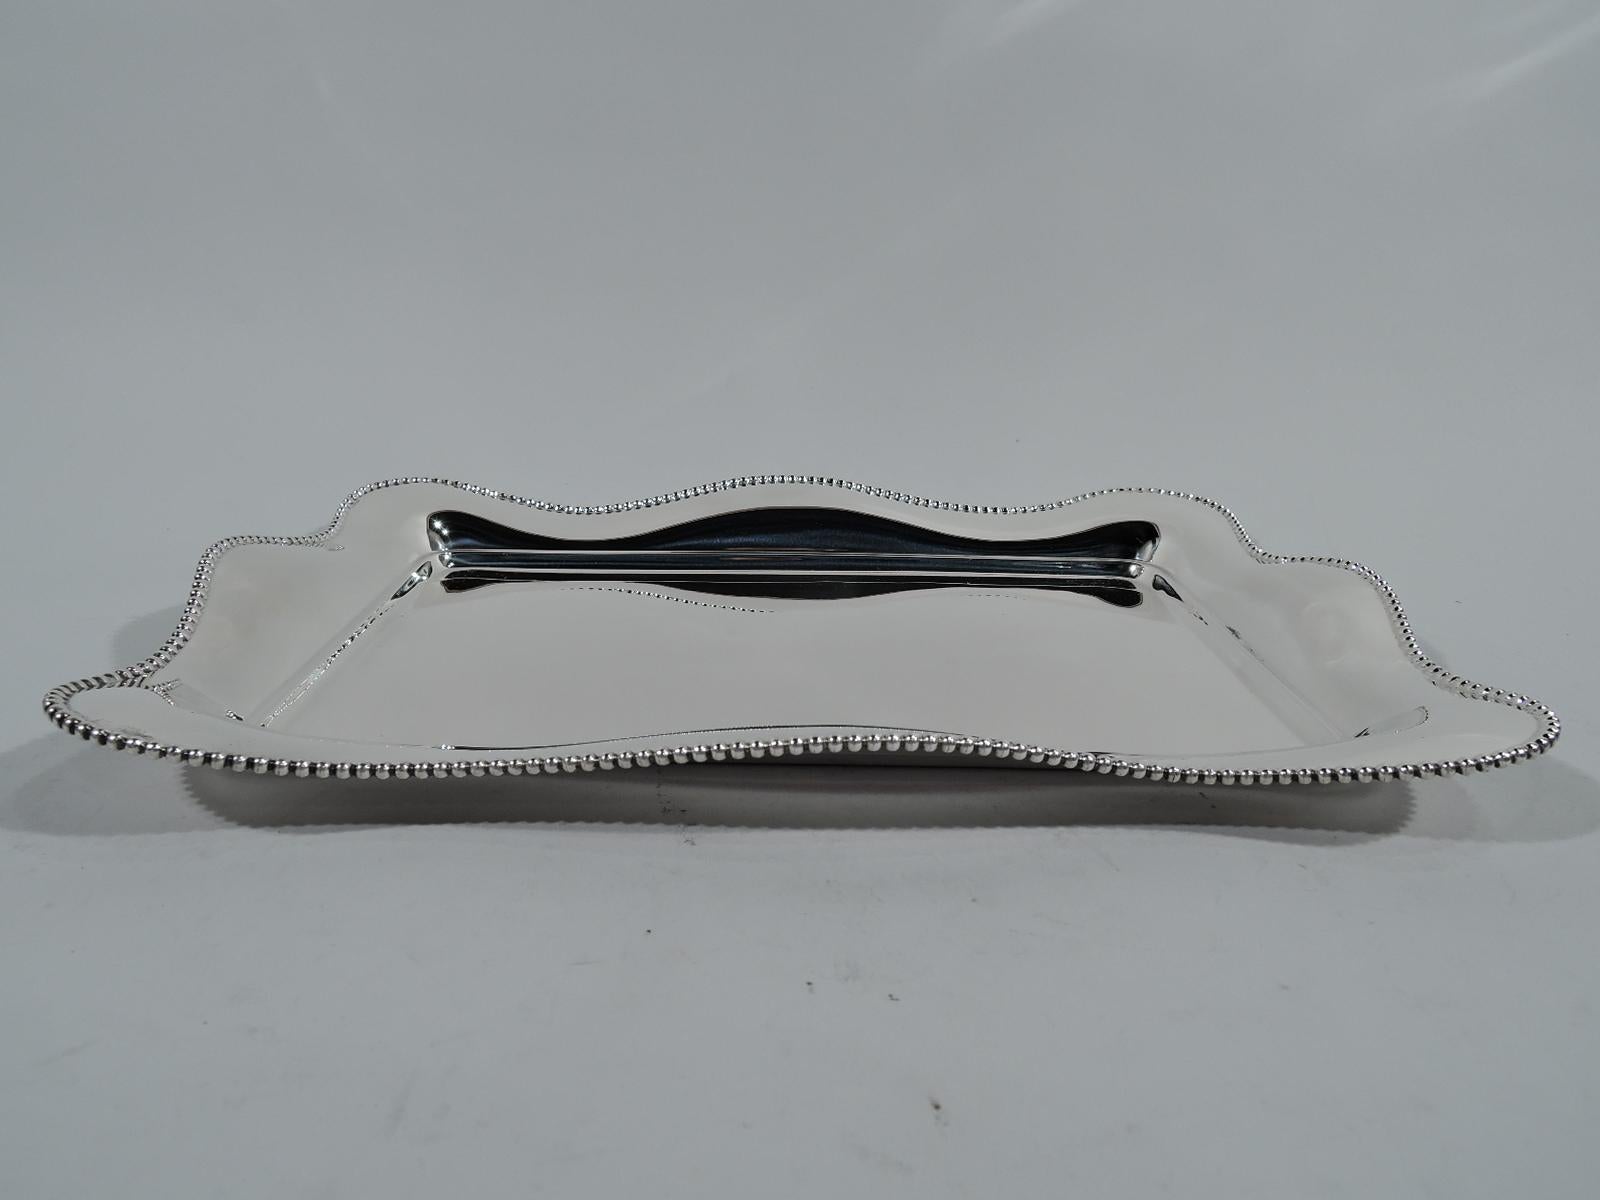 Modern sterling silver tray. Made by R. Wallace & Sons in Wallingford, Conn, circa 1910. Rectangular well with wavy and beaded rim. Hallmark includes no. 538. Weight: 12.5 troy ounces.